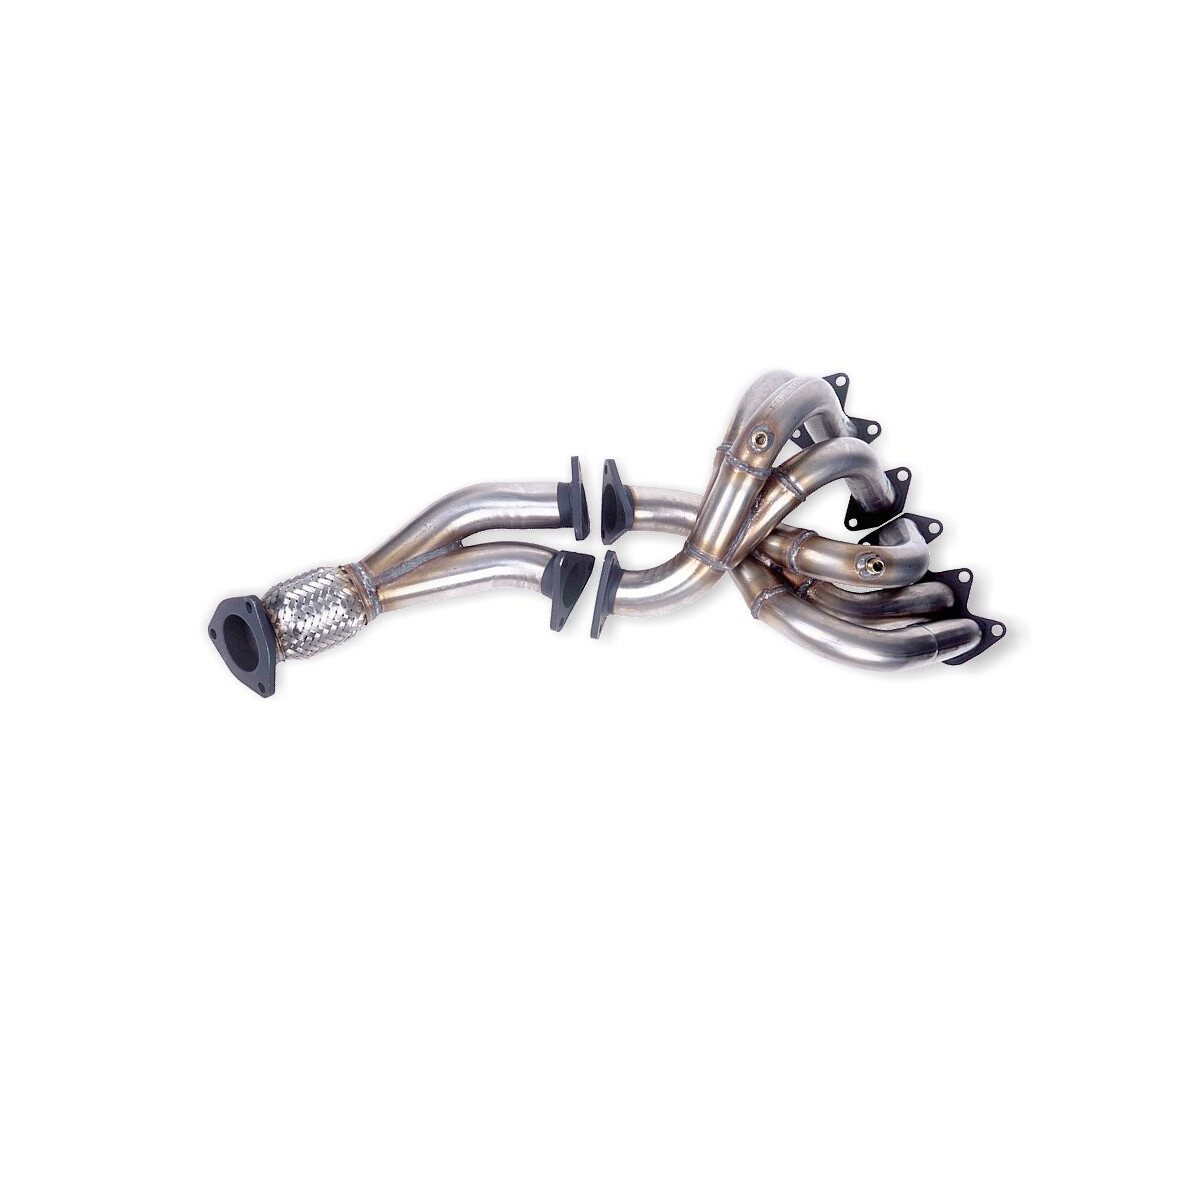 TeZet stainless steel exhaust header for Cordoba...